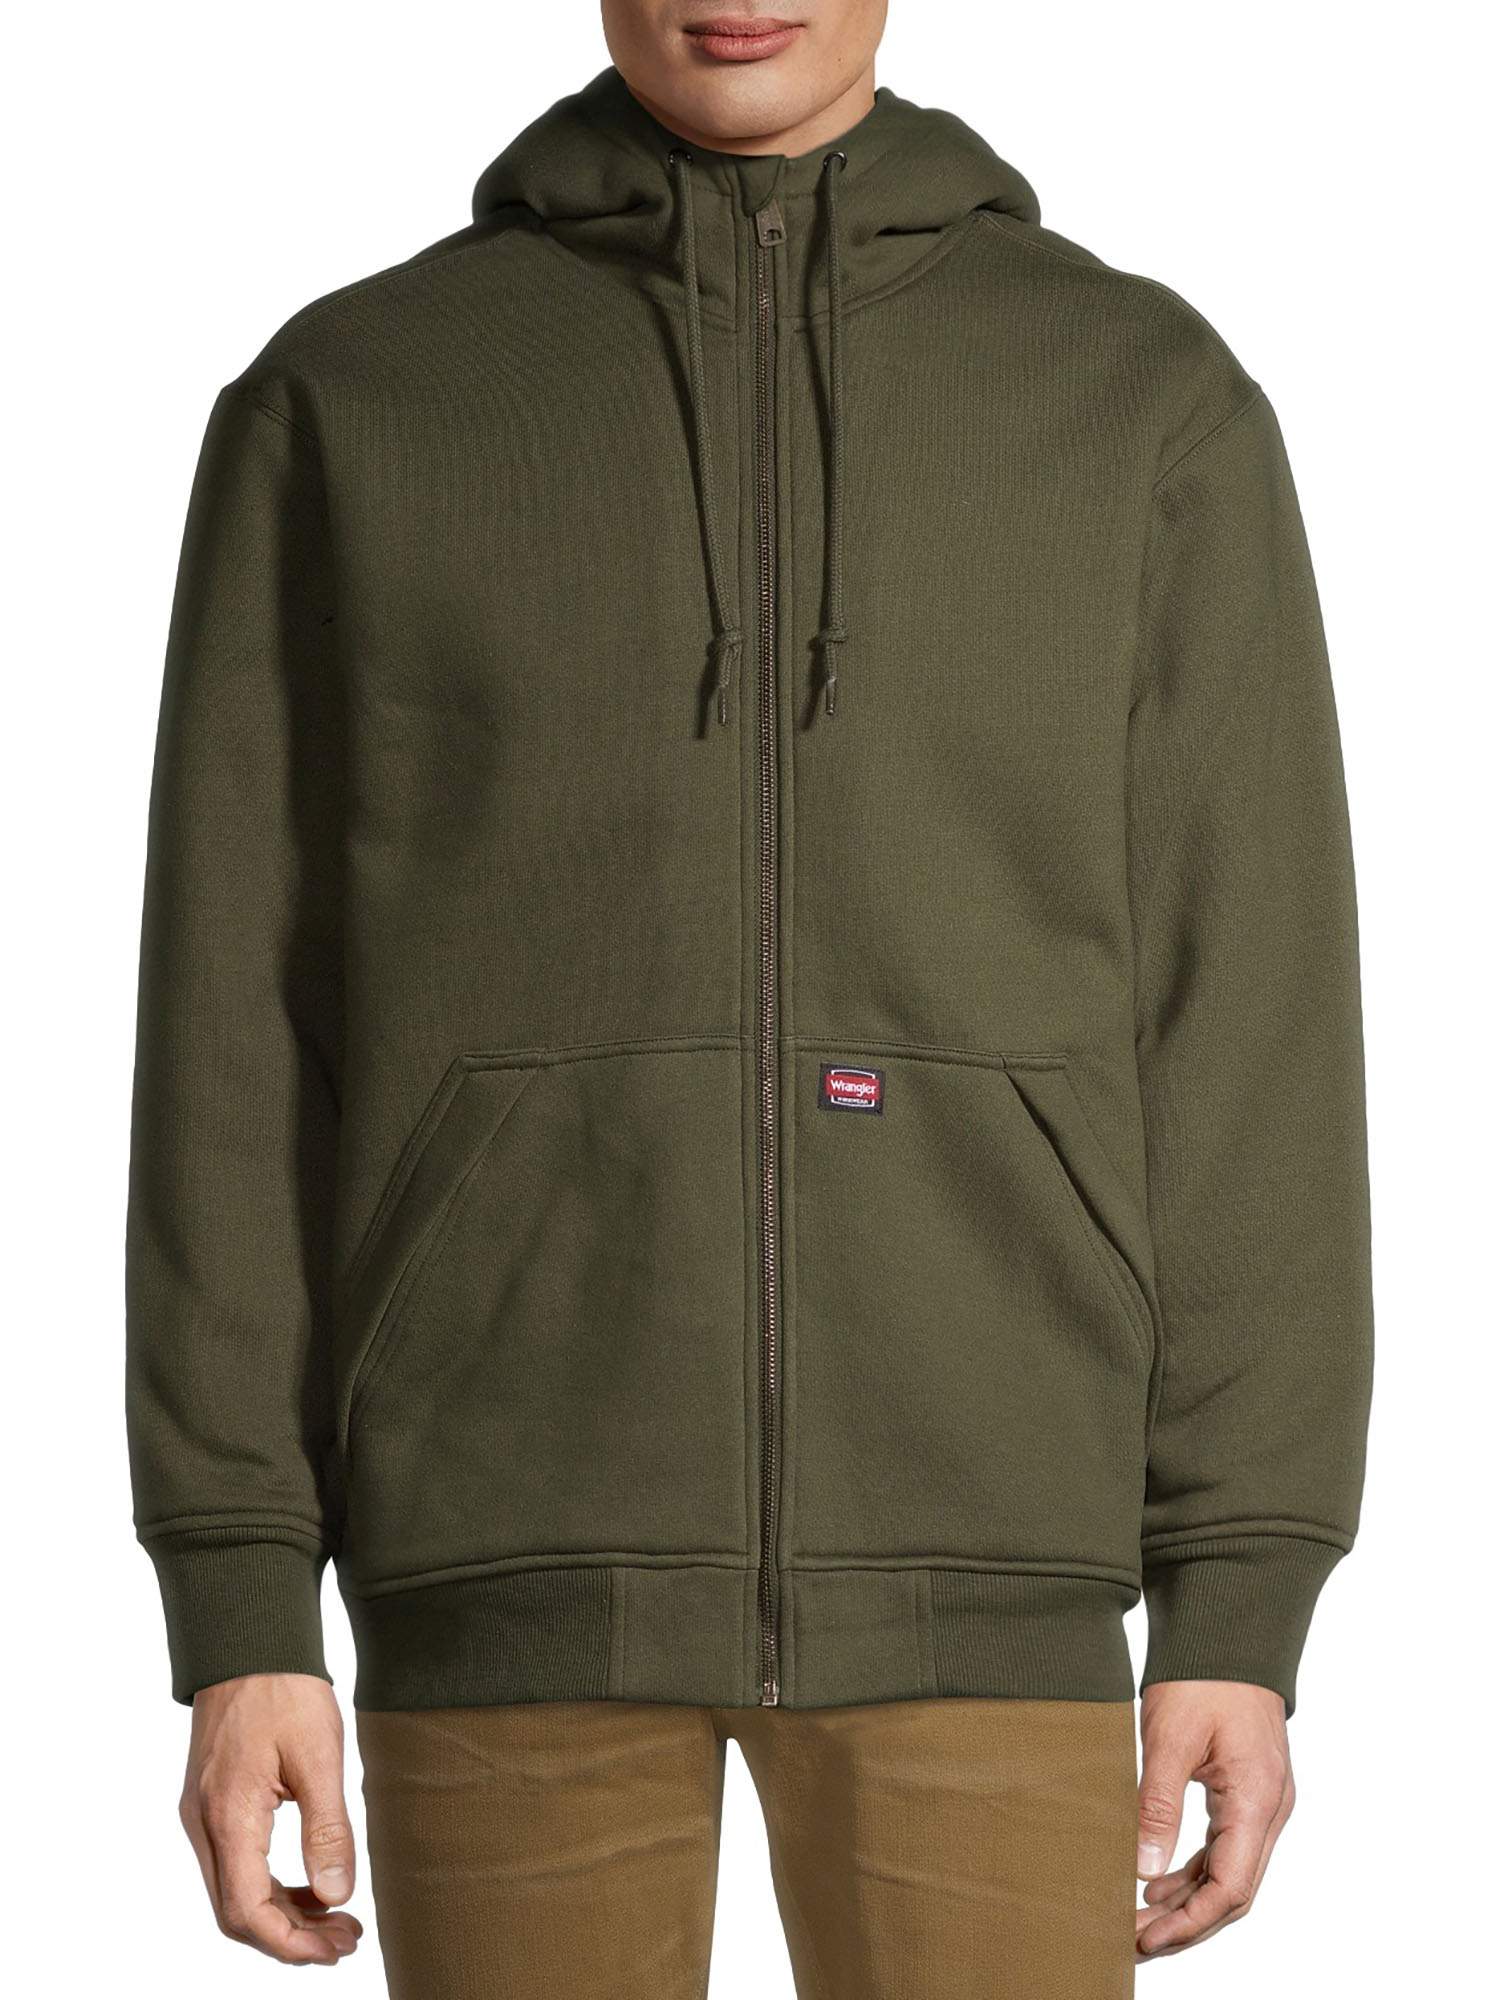 Wrangler Workwear Men's Guardian Heavy Weight Faux Sherpa and Quilt Lined Hoodie - image 1 of 6